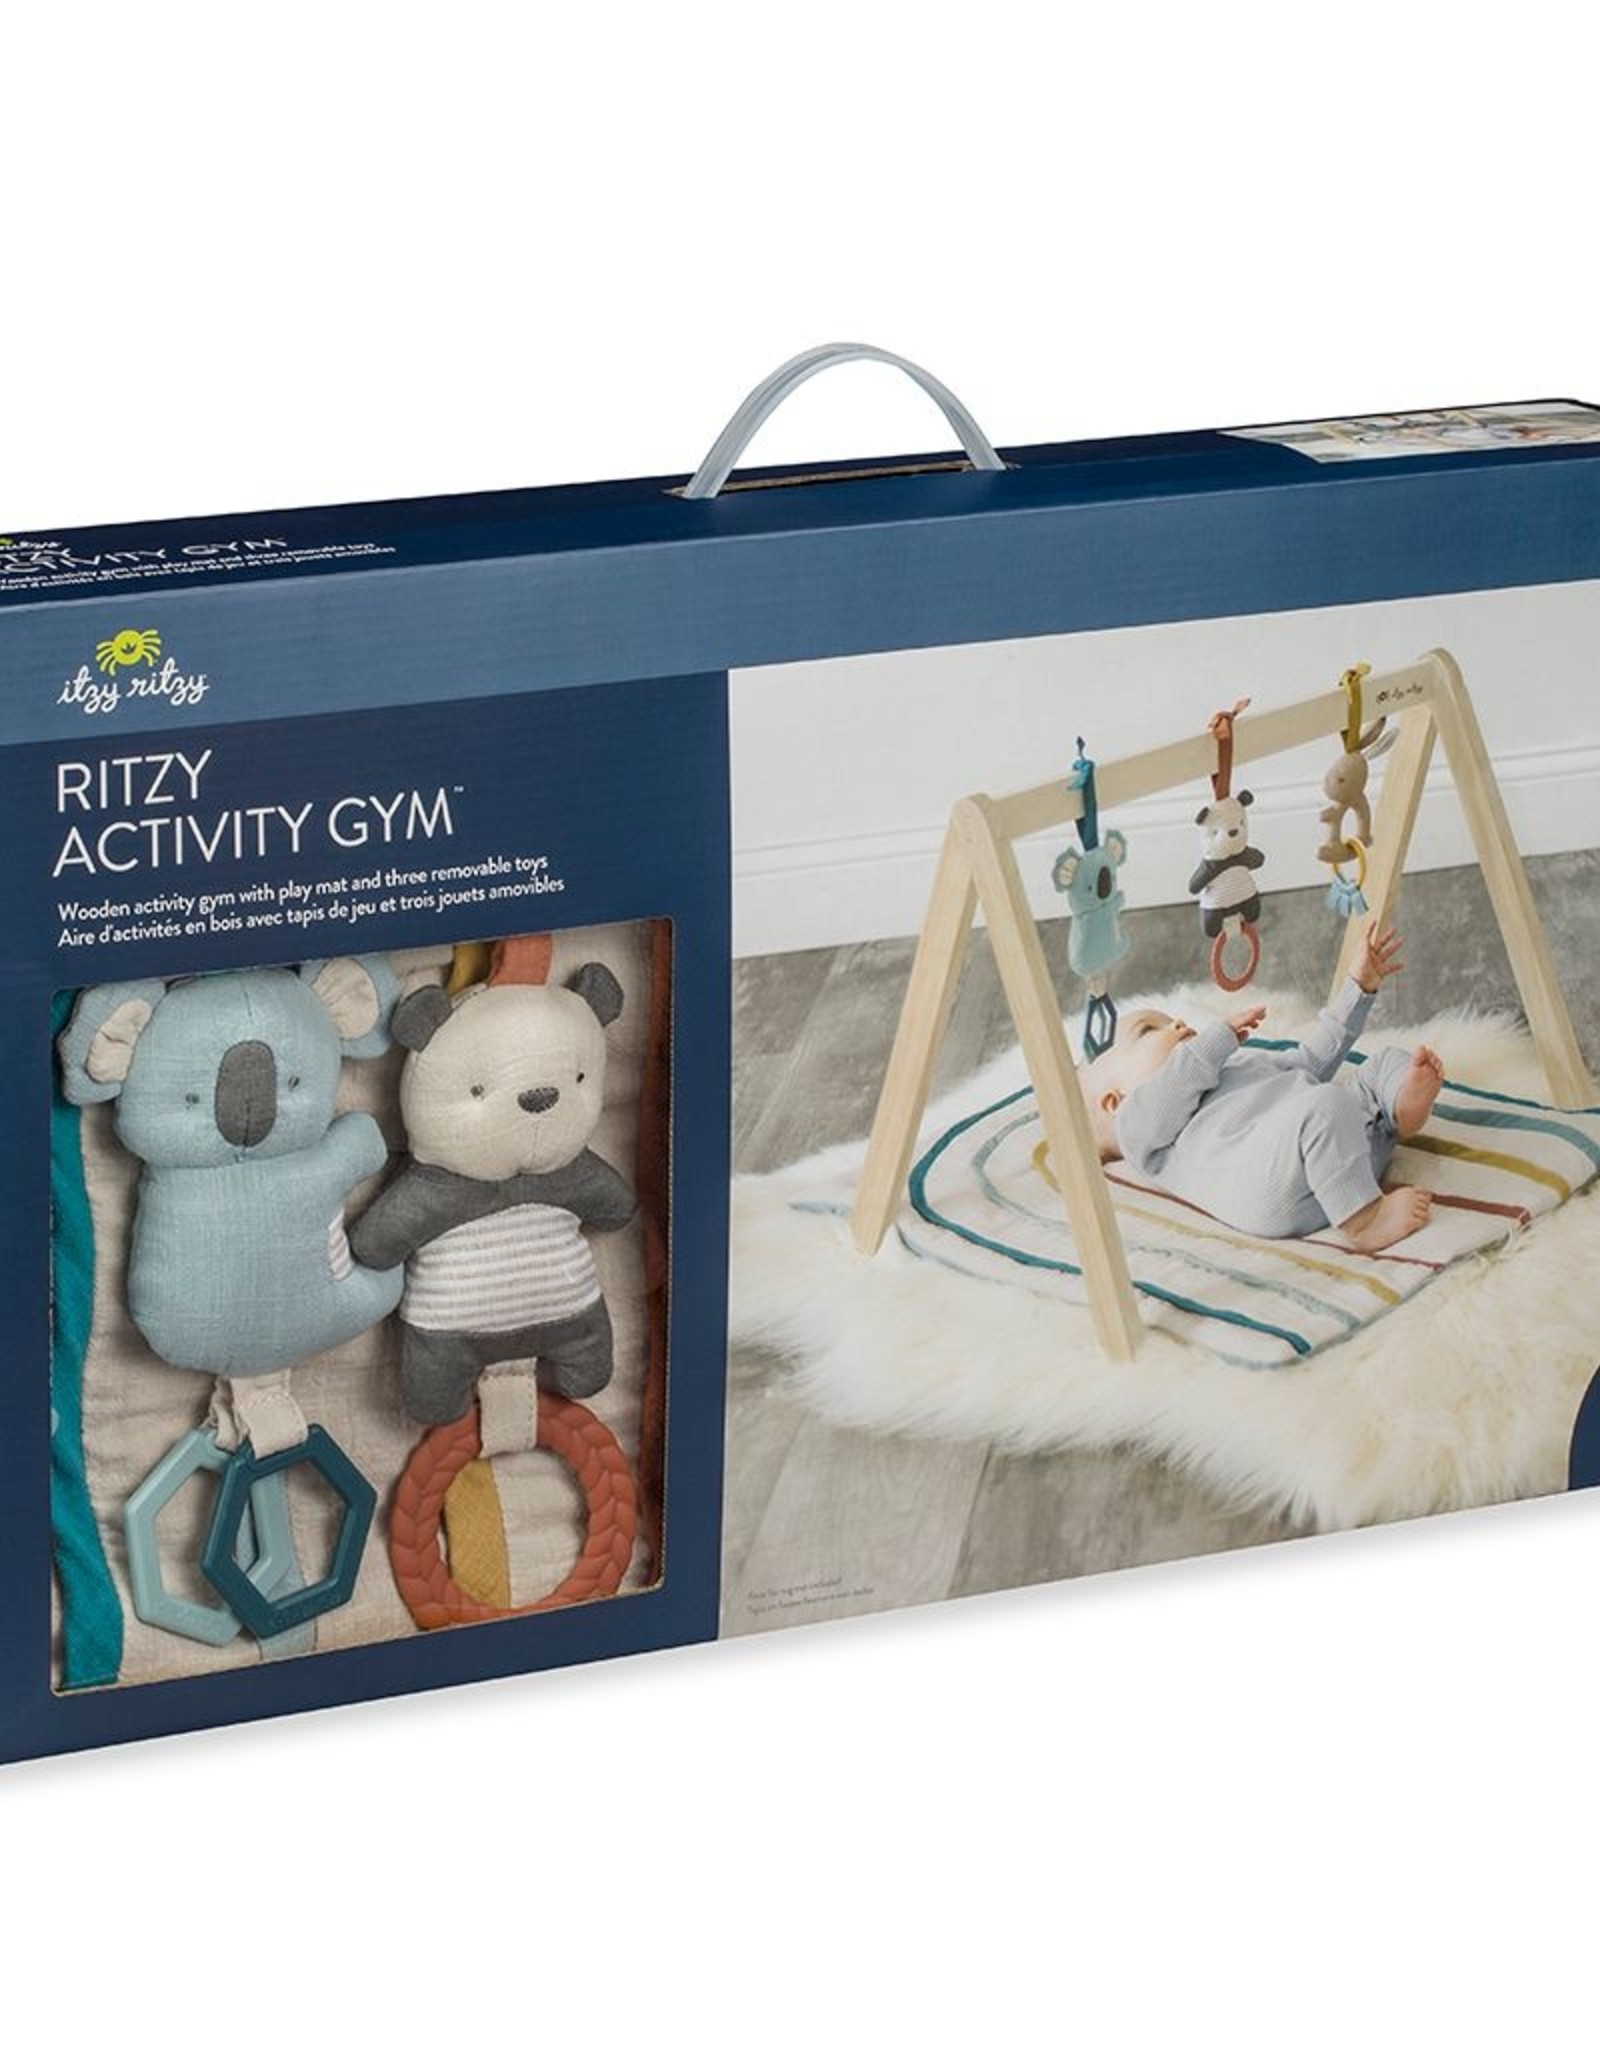 Itzy Ritzy Ritzy Activity Gym Wooden Gym with Toys